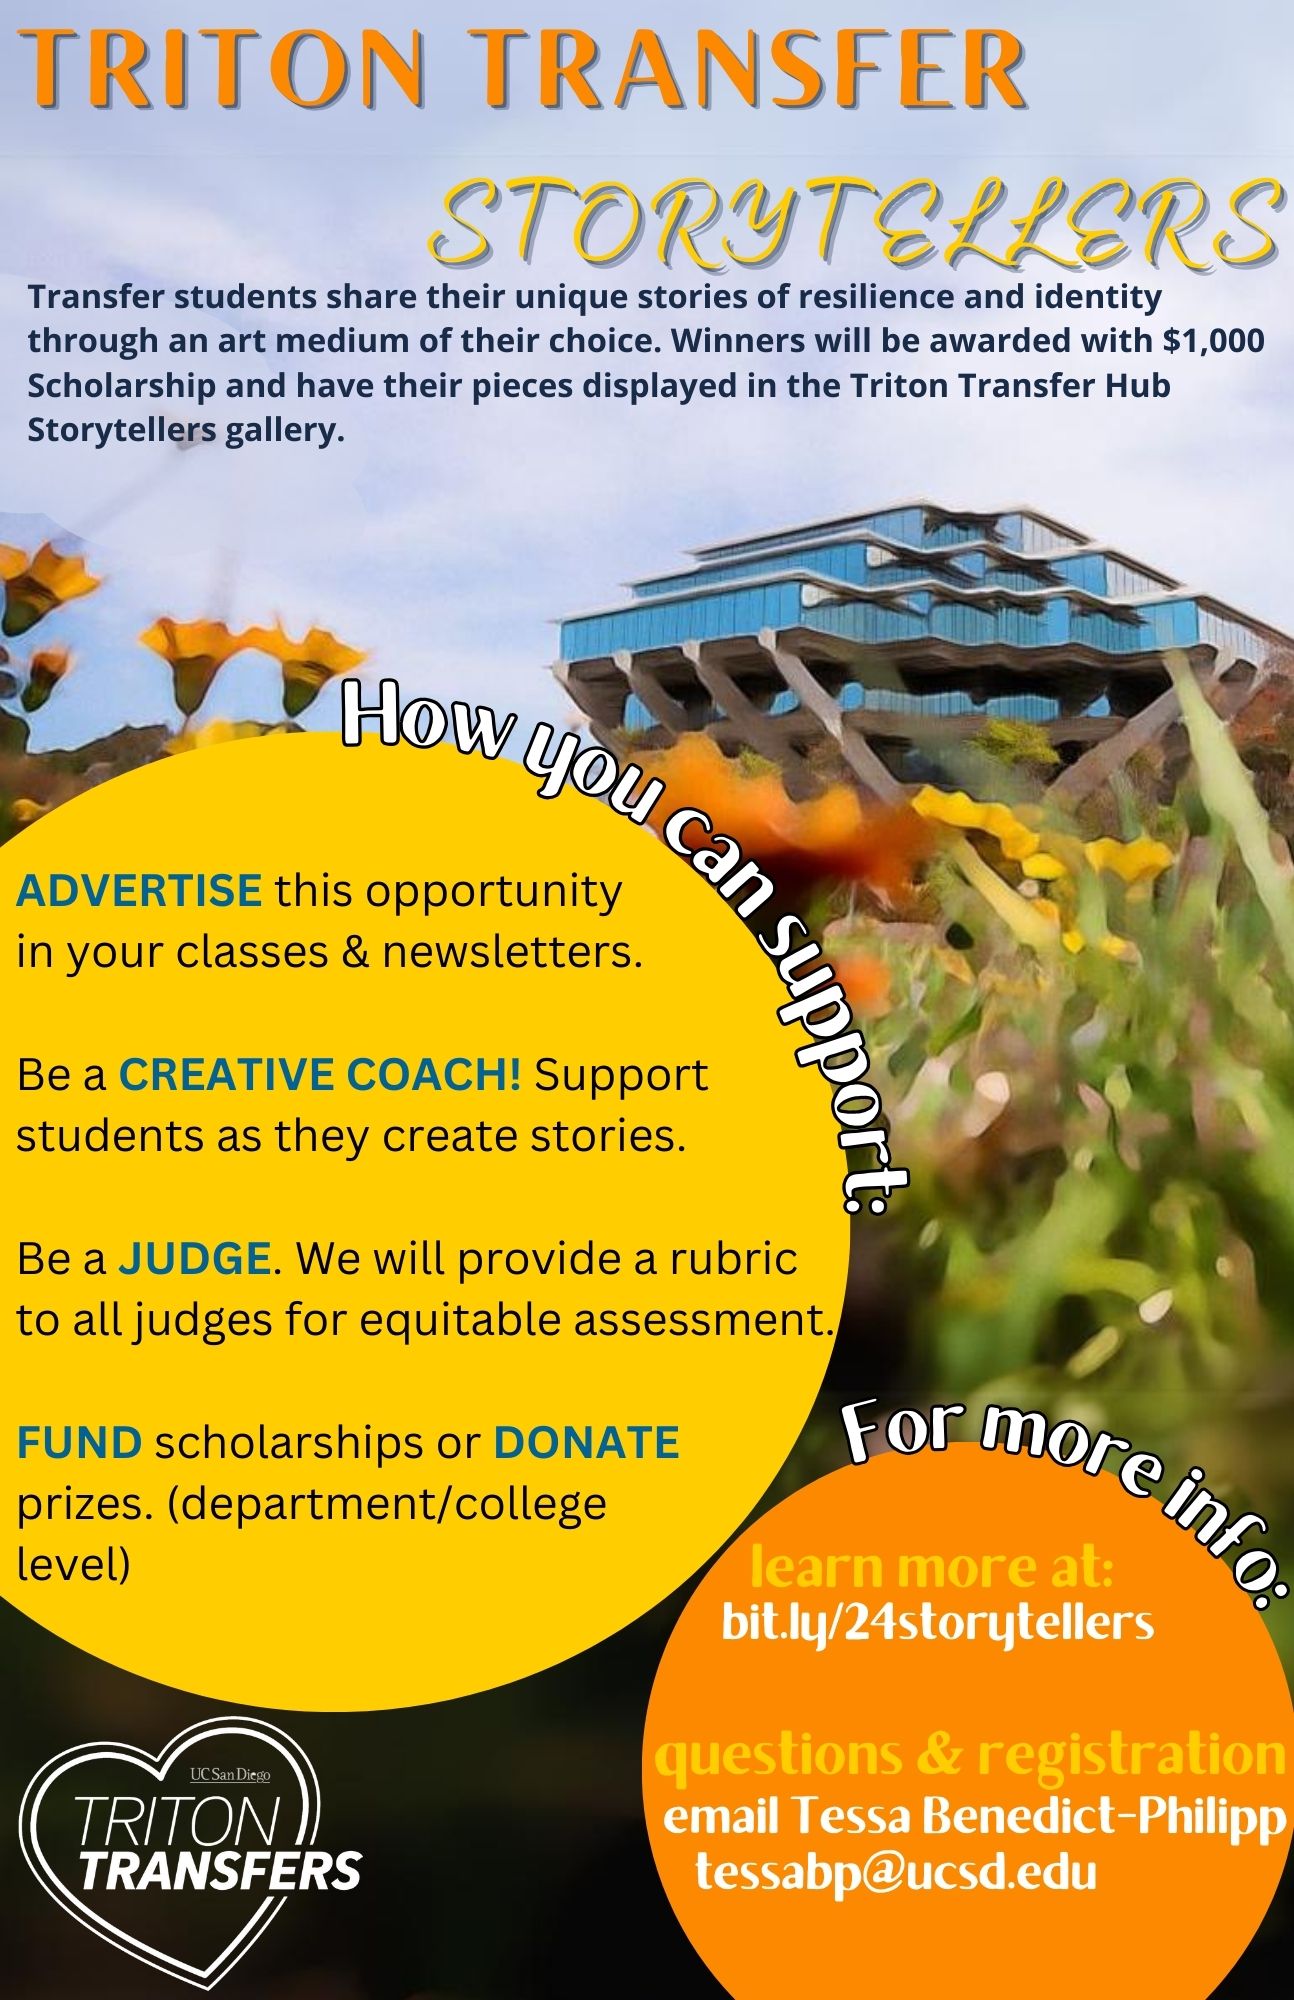 the Gilman Library is pictured with orange and yellow flowers and text - which is below: Transfer students share their unique stories of resilience and identity through an art medium of their choice. Winners will be awarded with $1,000 Scholarship and have their pieces displayed in the Triton Transfer Hub Storytellers gallery. How you can support: ADVERTISE this opportunity in your classes & newsletters.  Be a CREATIVE COACH! Support students as they create stories.  Be a JUDGE. We will provide a rubric to all judges for equitable assessment.  FUND scholarships or DONATE prizes. (department/college level) For more info: learn more at:   bit.ly/24storytellers questions & registration   email Tessa Benedict-Philipp      tessabp@ucsd.edu